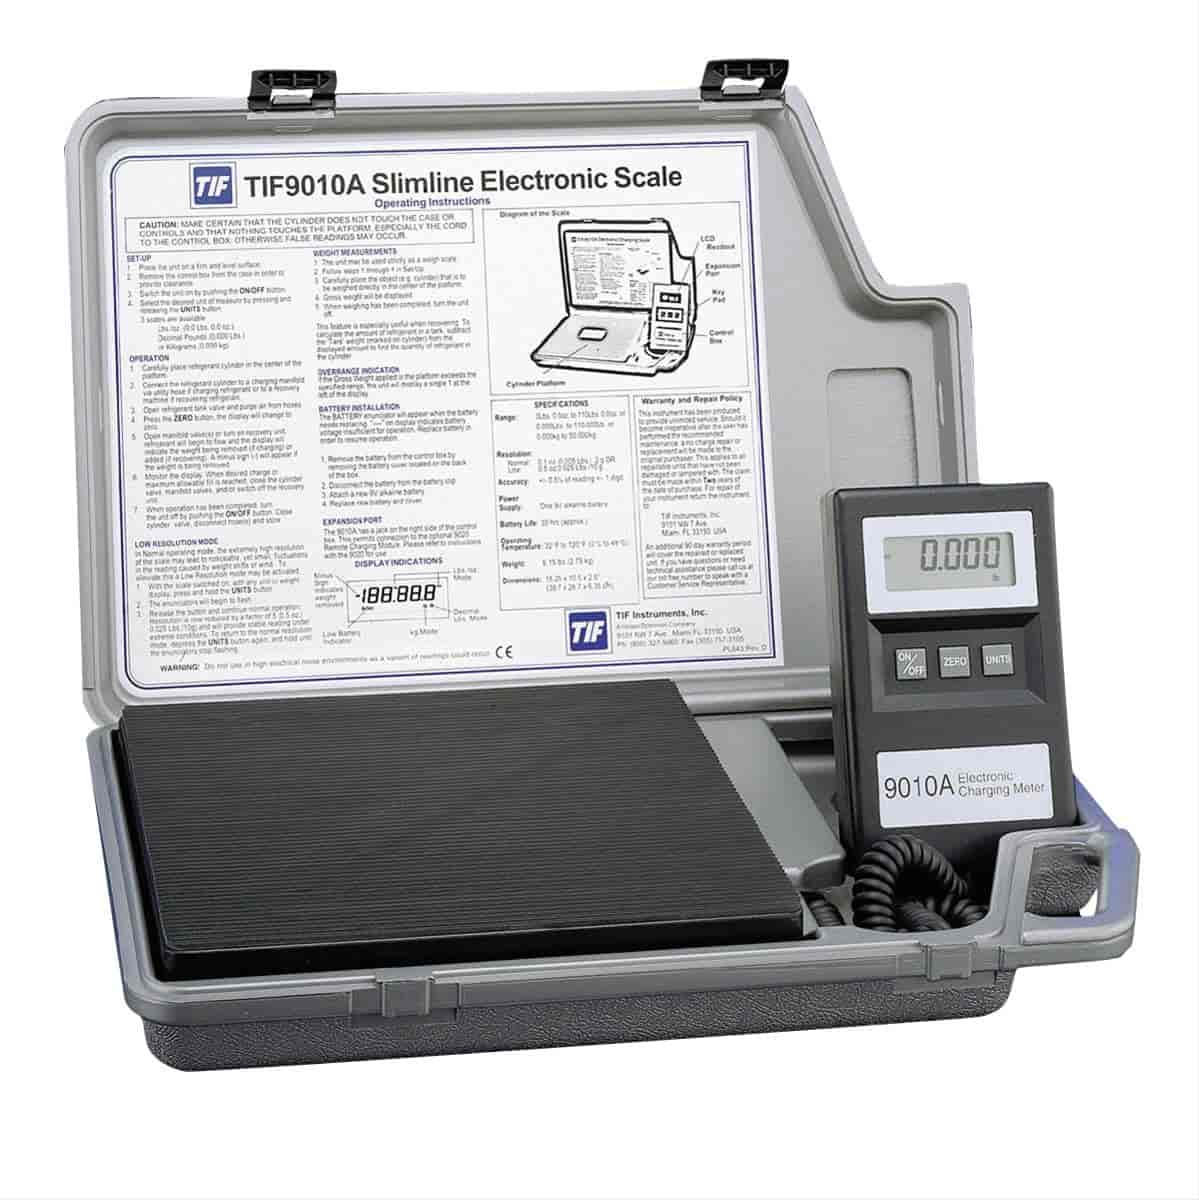 Slimline Electronic Charging/Recovery Refrigerant Scale